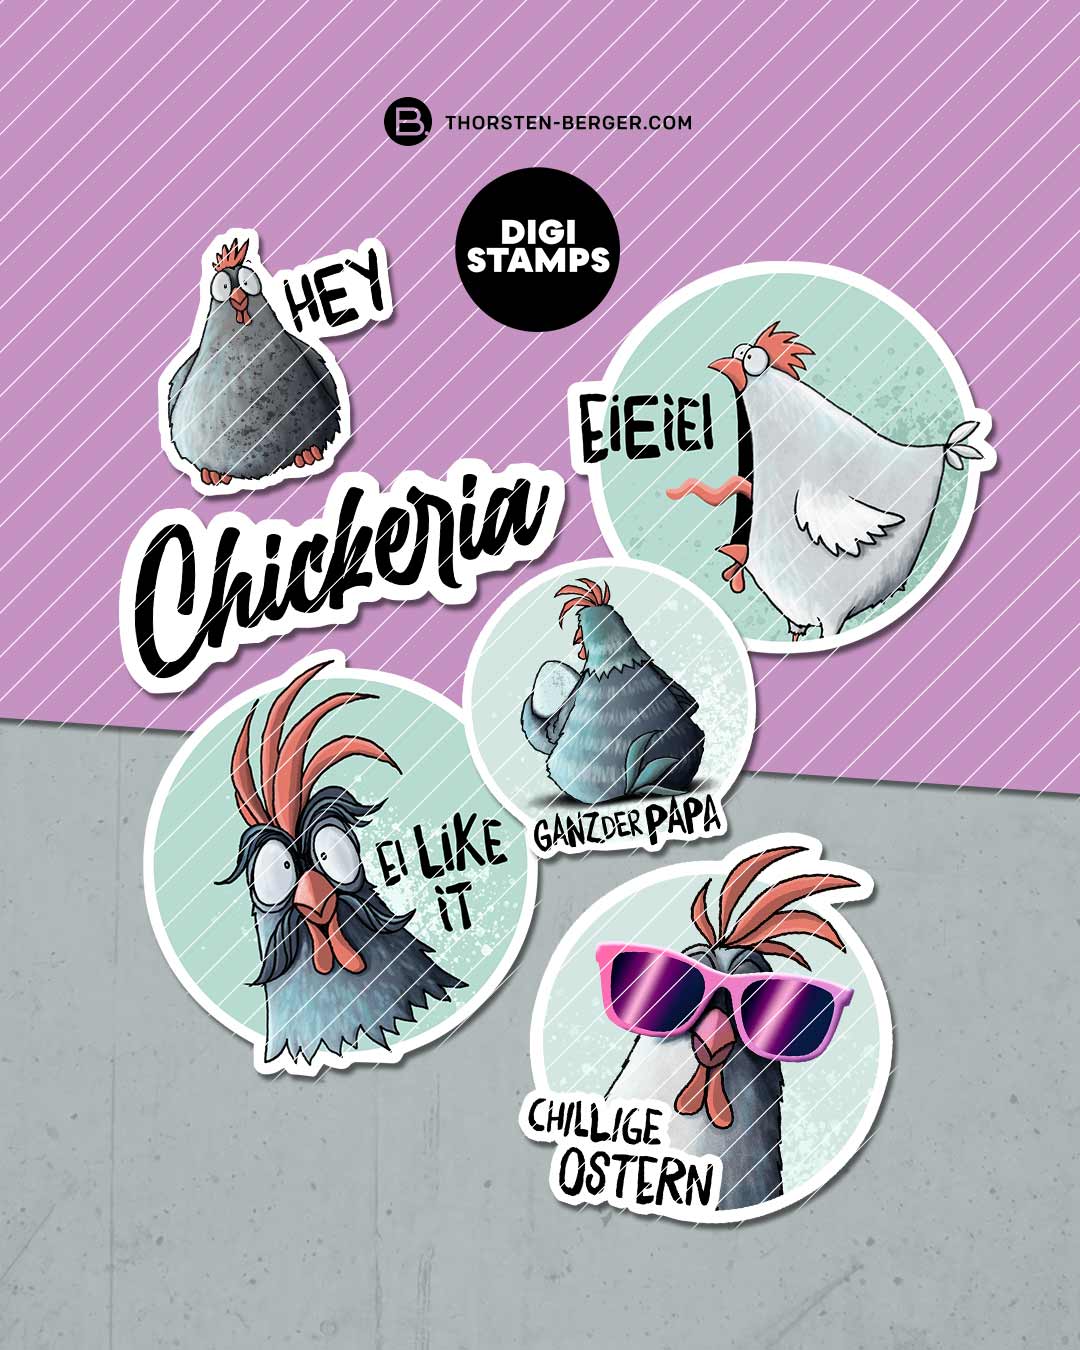 BAMPED® Digistamps Chickeria by Thorsten Berger